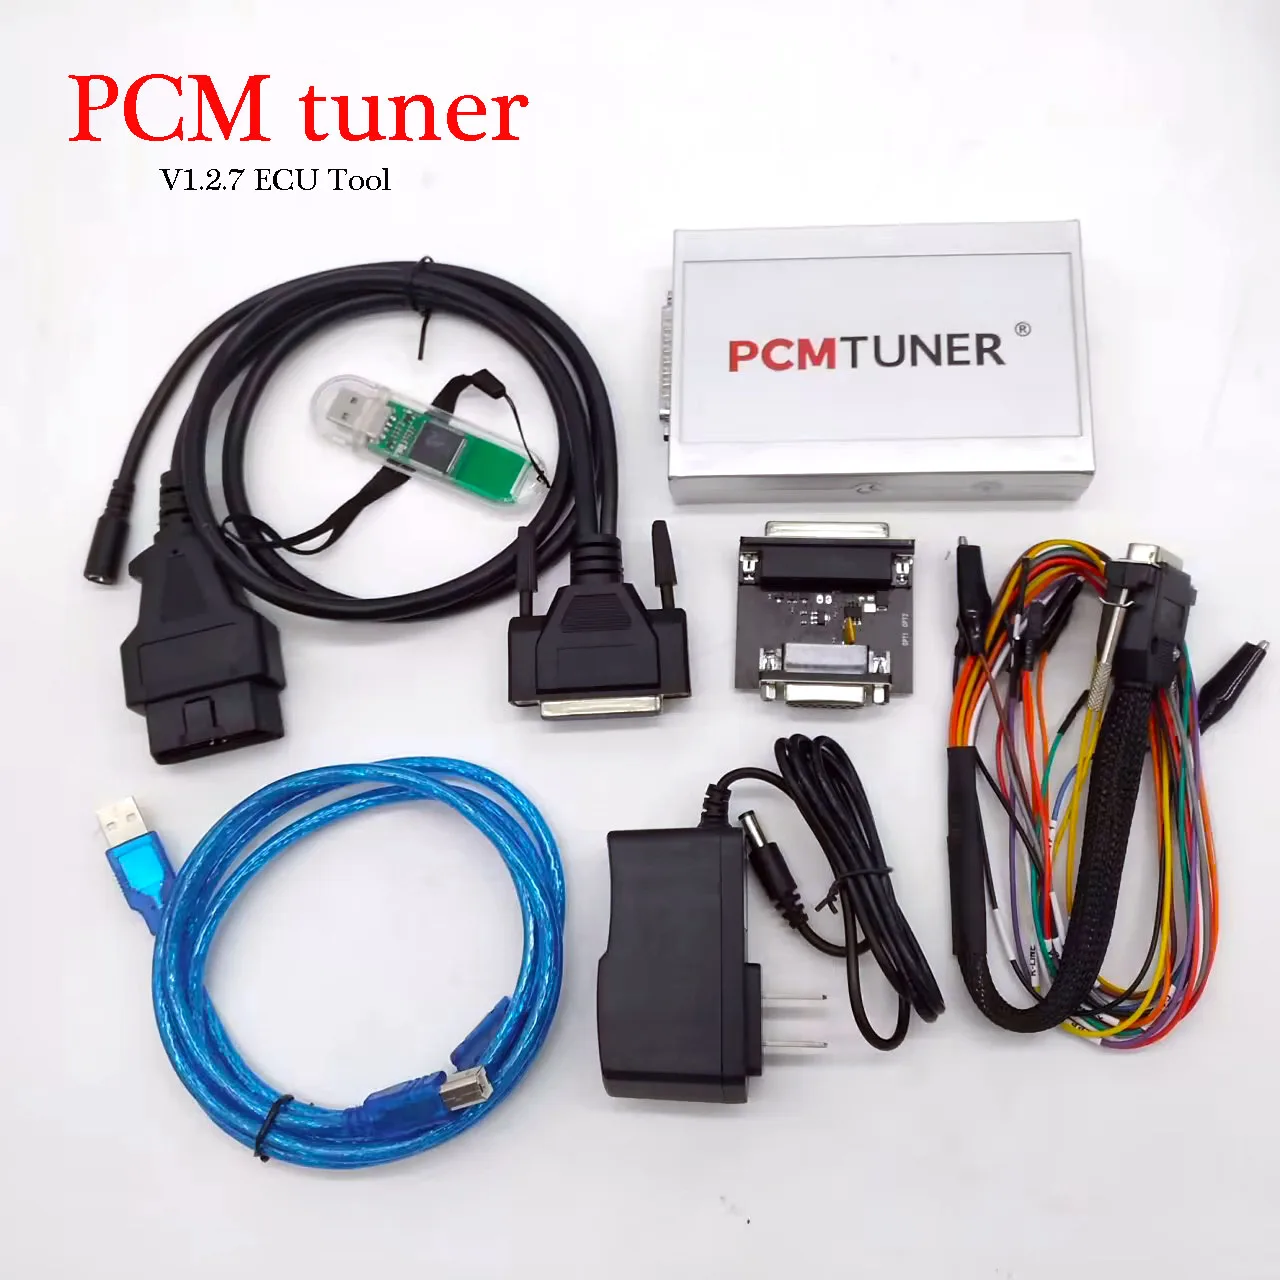 

Latest PCMtuner V1.2.0 ECU Tool 67 Modules in 1 Full Software Set More Authorisations Better than SM2 Pro